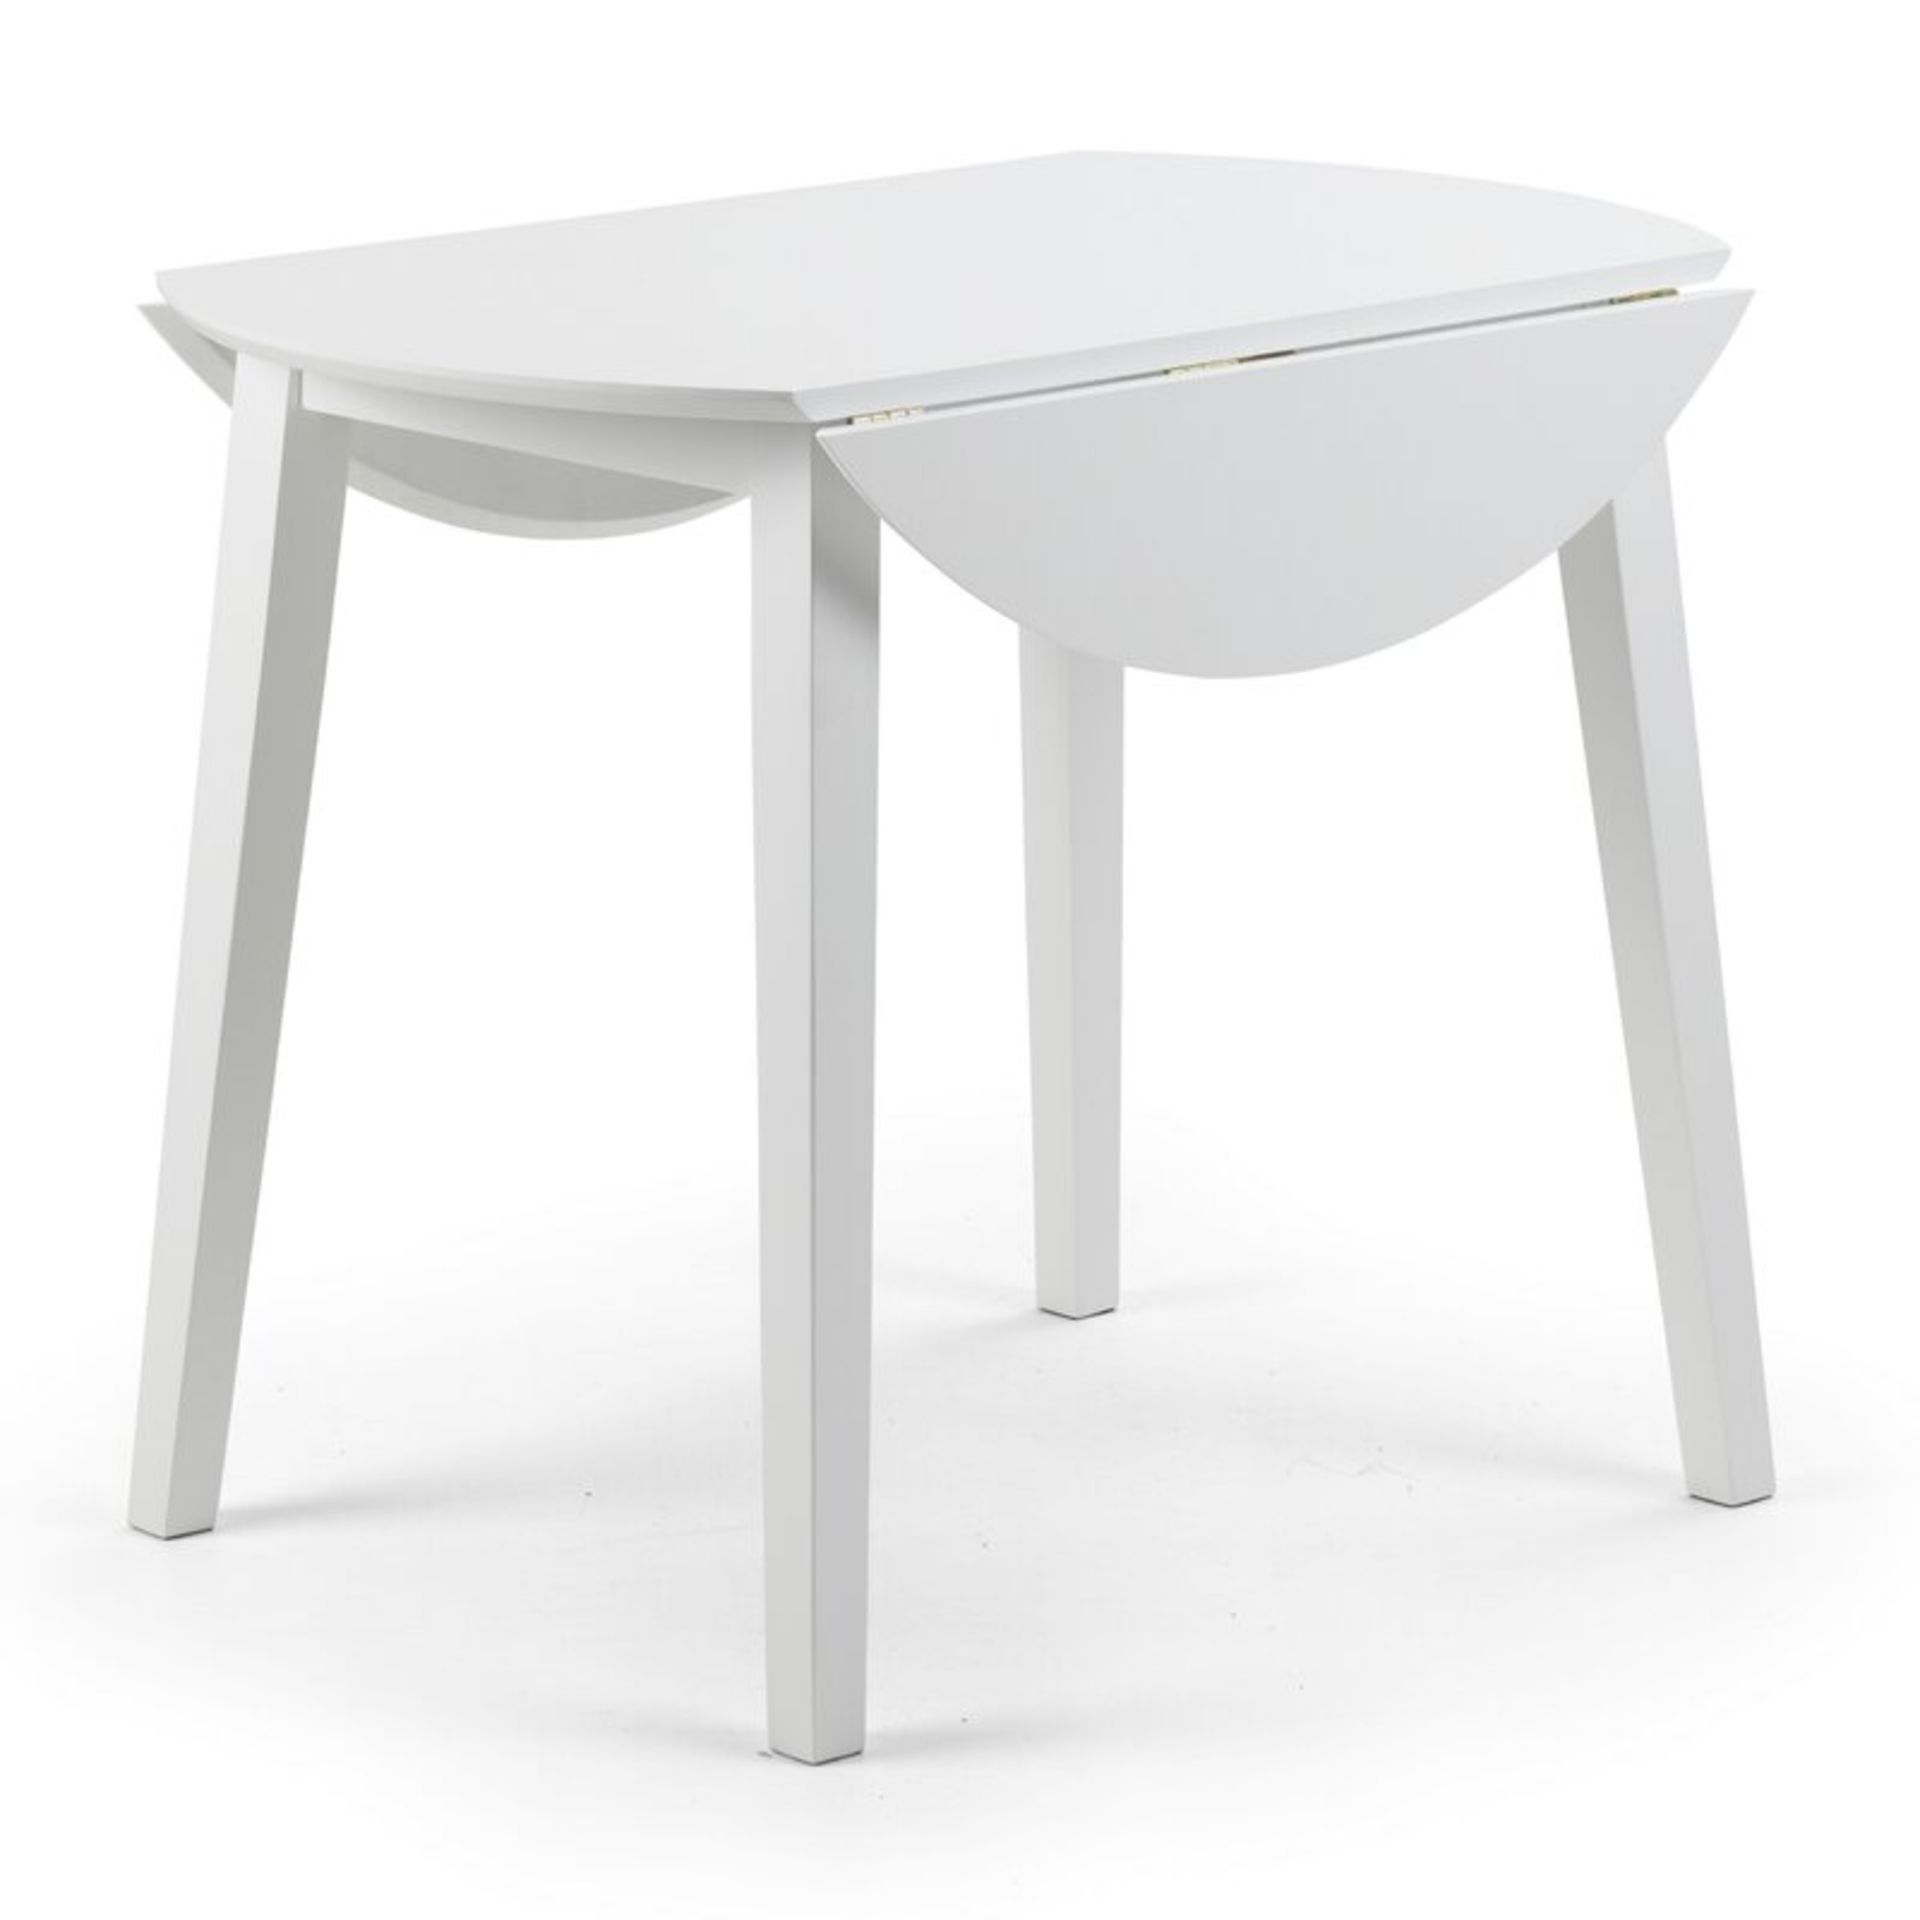 Inglewood Extendable Dining Table - RRP £119.99 - Image 3 of 3